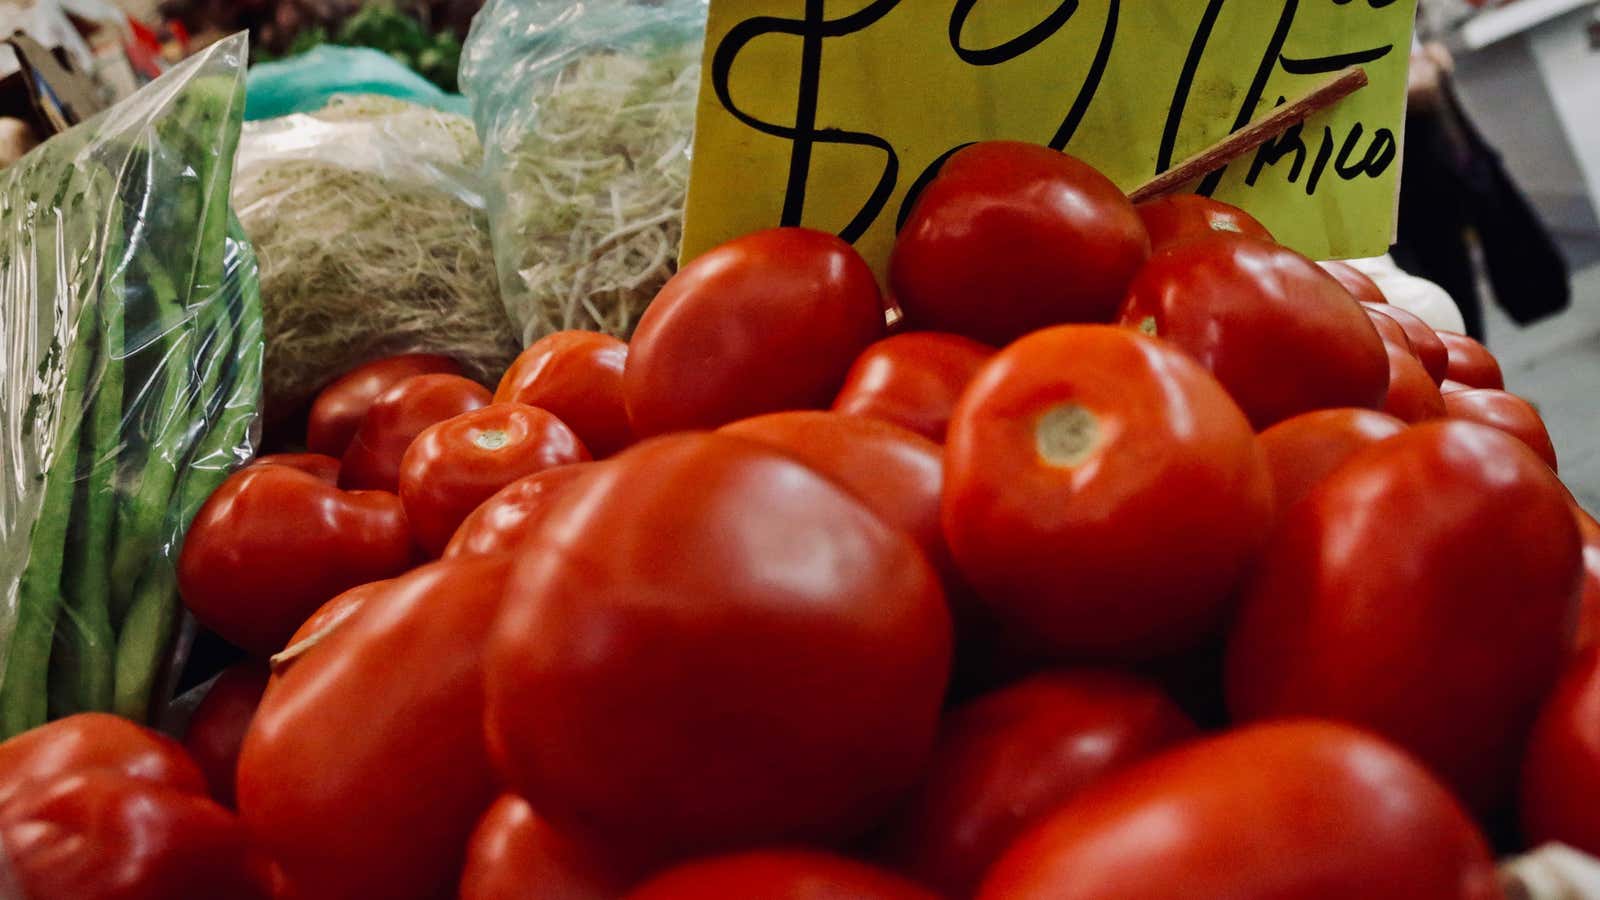 The termination of the US-Mexico Tomato Suspension Agreement could hit home.